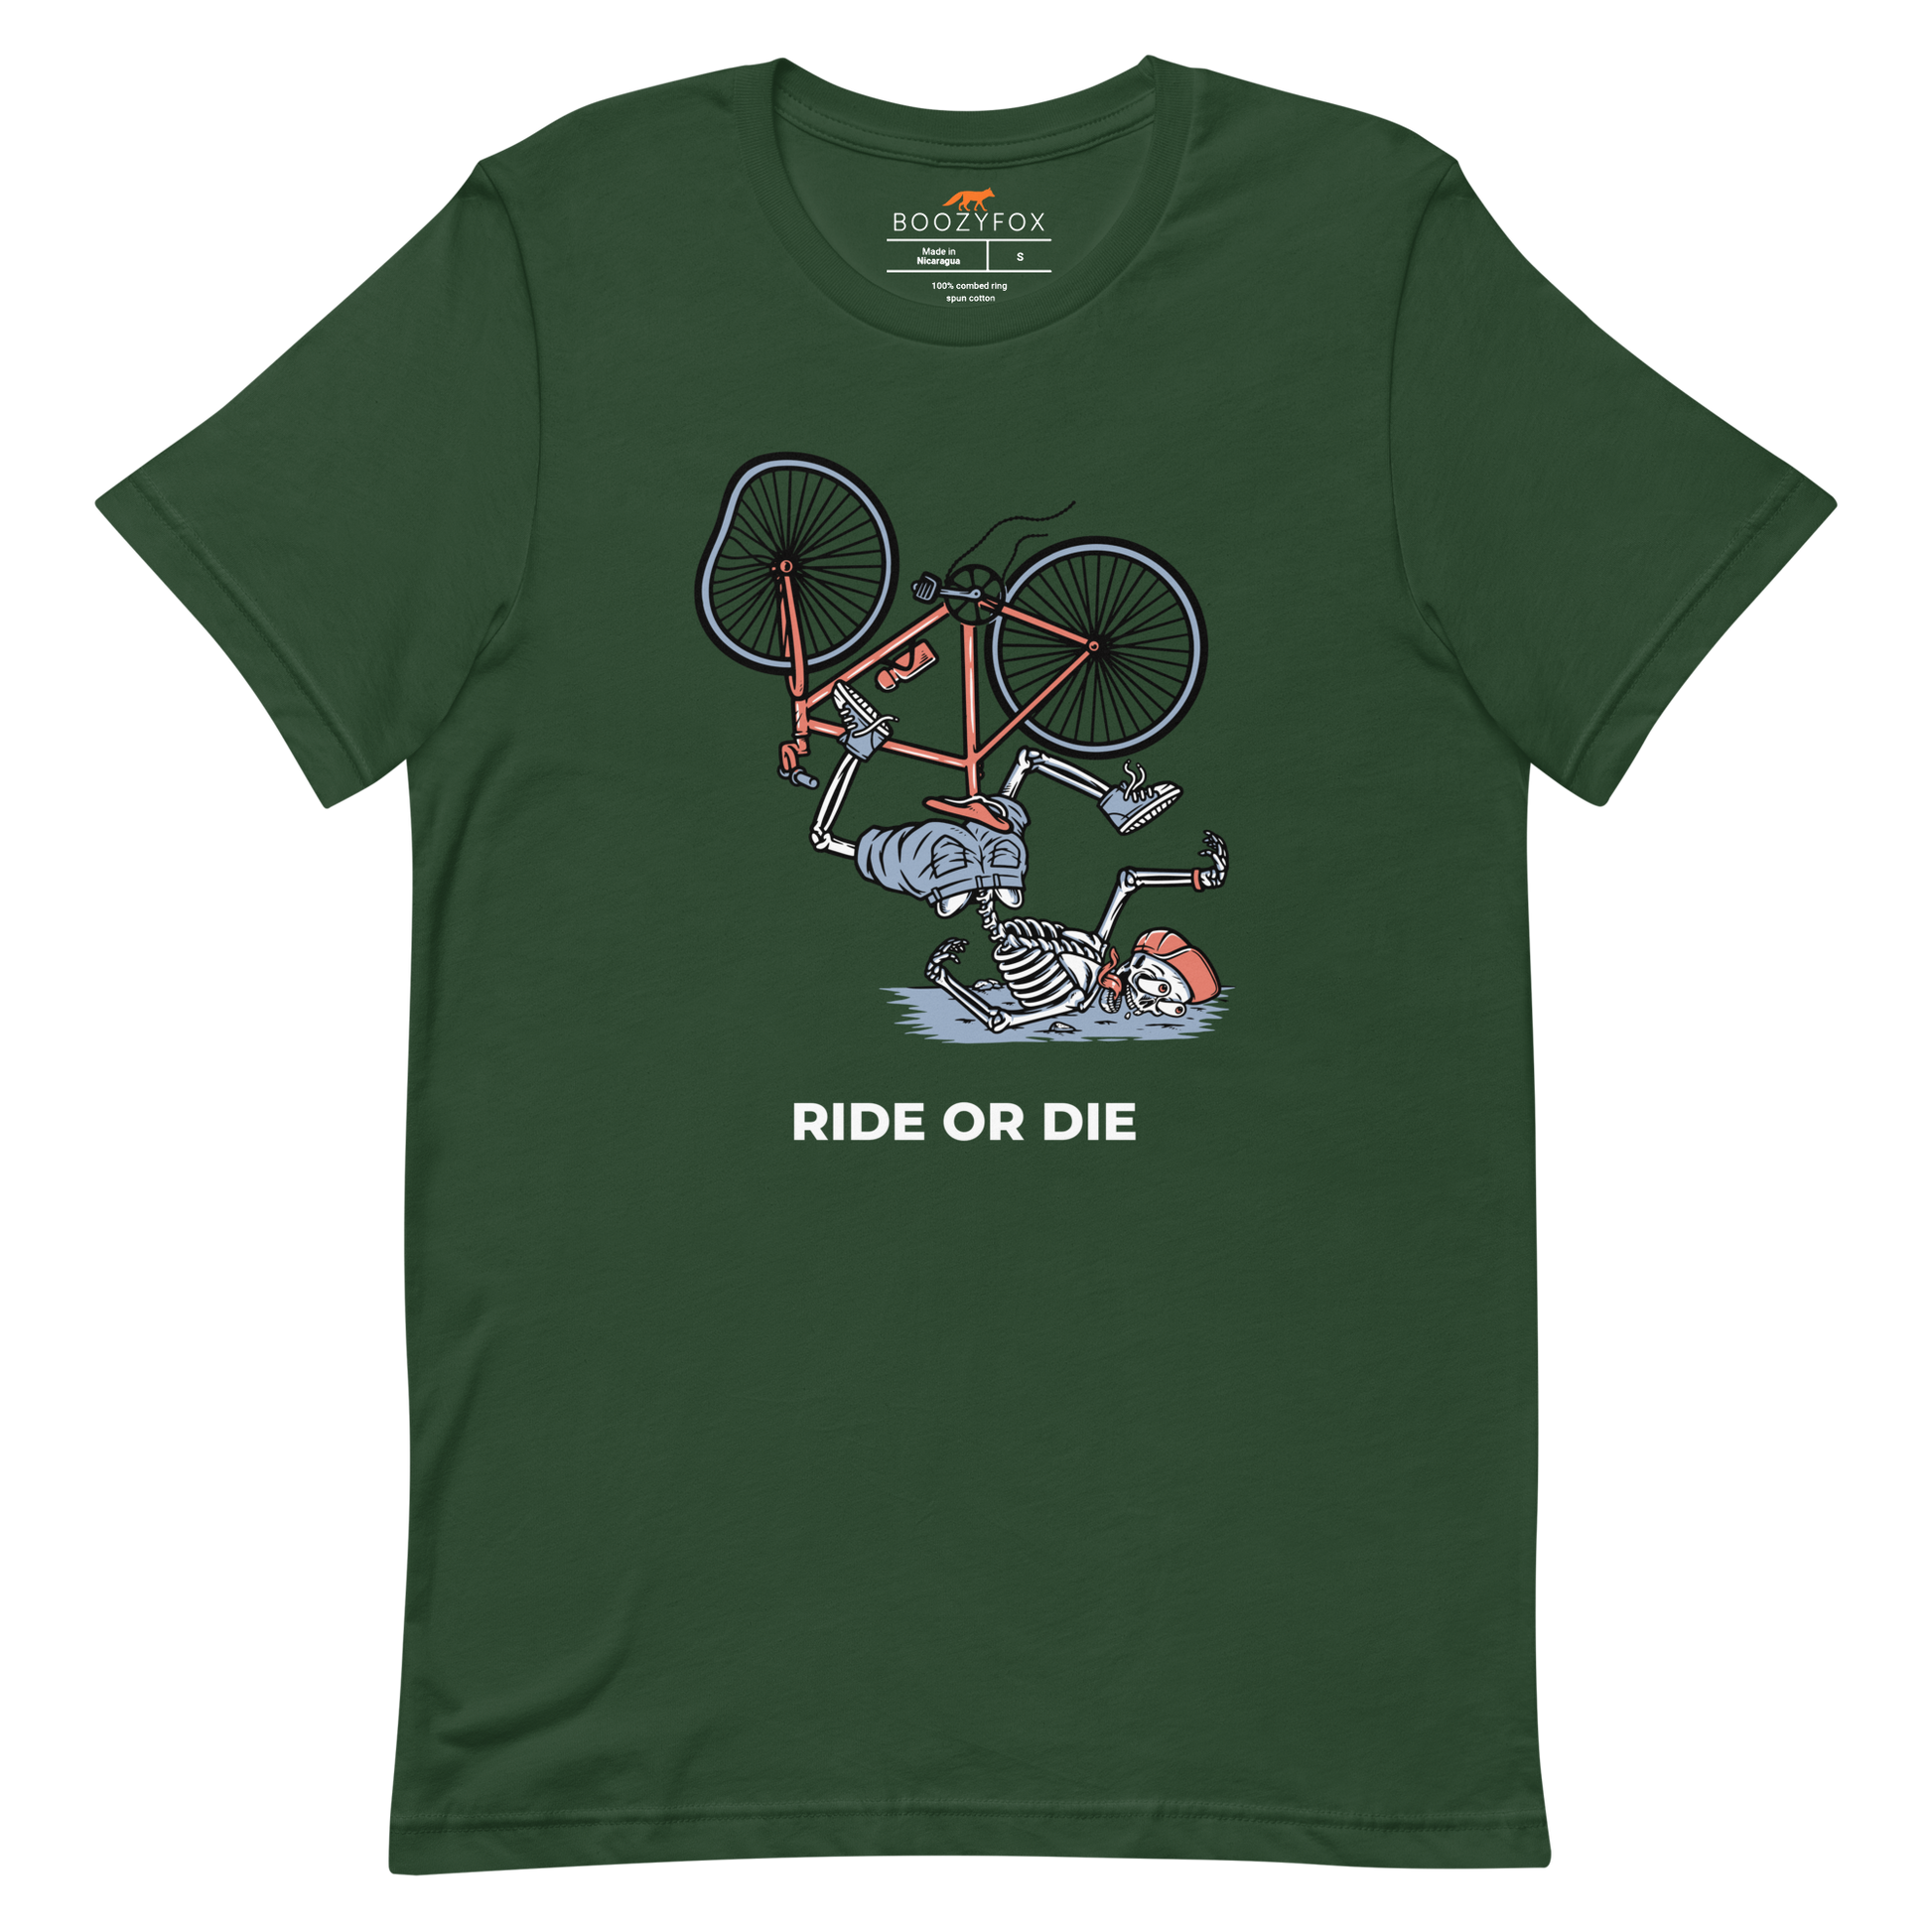 Forest Green Premium Ride or Die Tee featuring a bold Skeleton Falling While Riding a Bicycle graphic on the chest - Funny Graphic Skeleton Tees - Boozy Fox